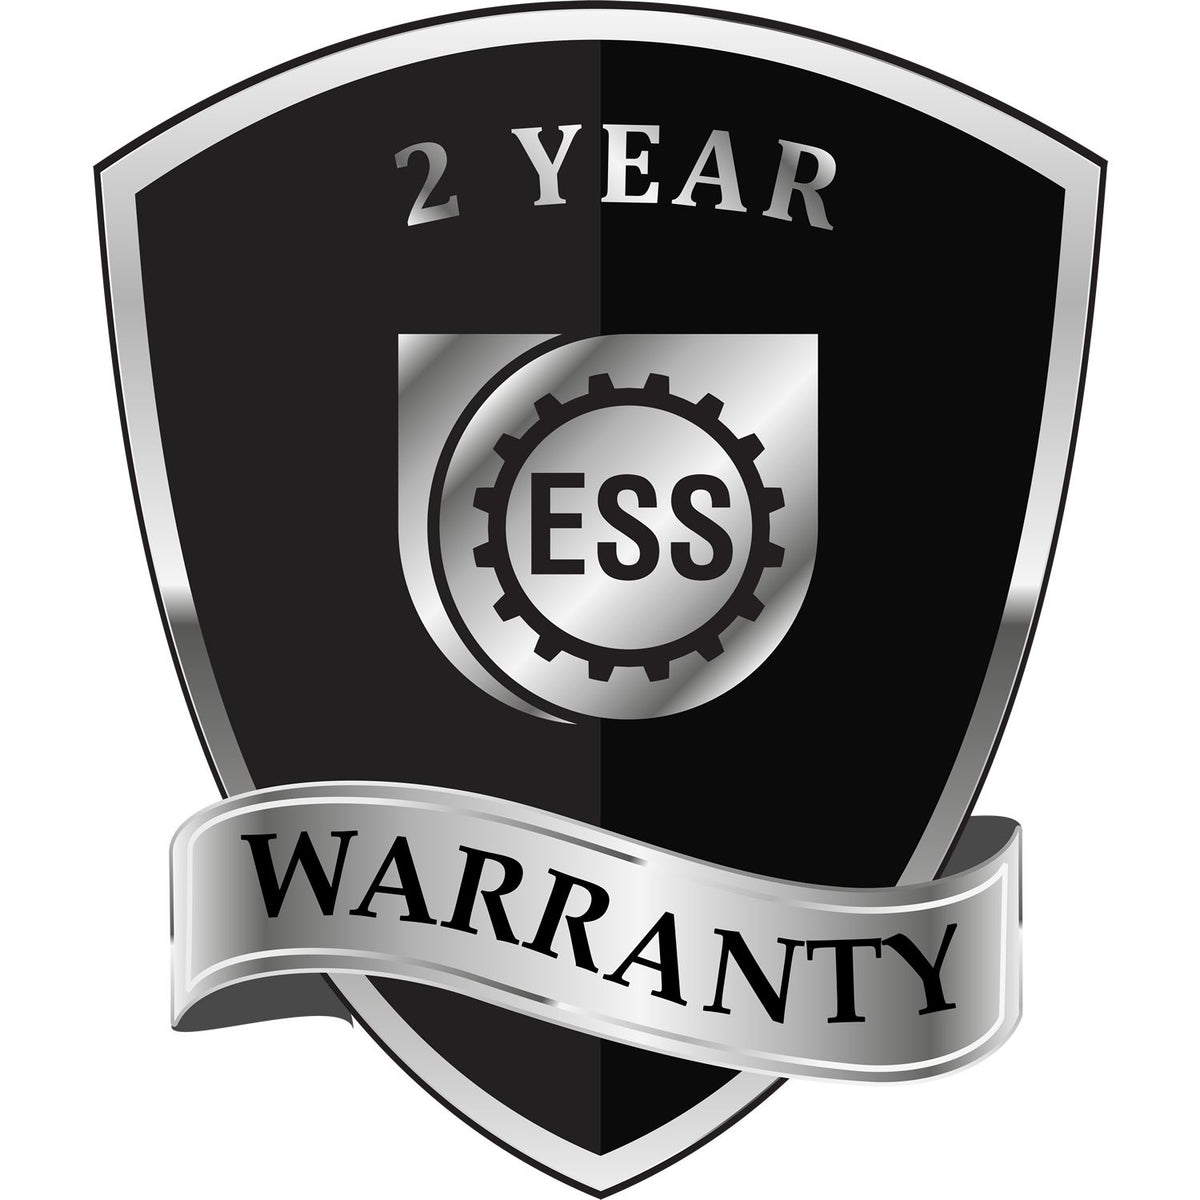 A black and silver badge or emblem showing warranty information for the Hybrid Virginia Engineer Seal